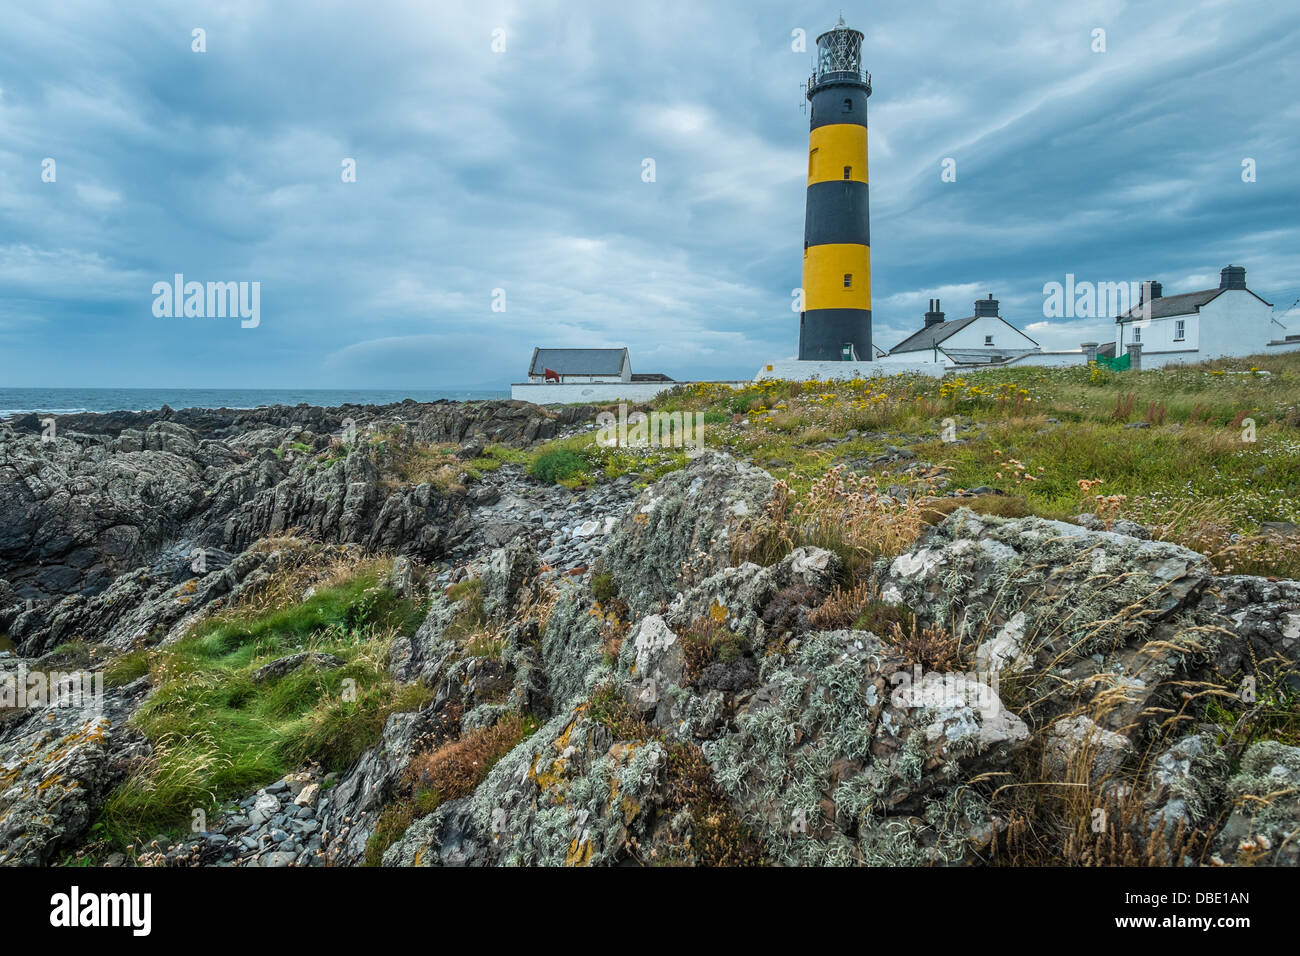 St John's Point Lighthouse in County Down Northern Ireland shown against stormy gray clouds with coastal rock formation in the f Stock Photo